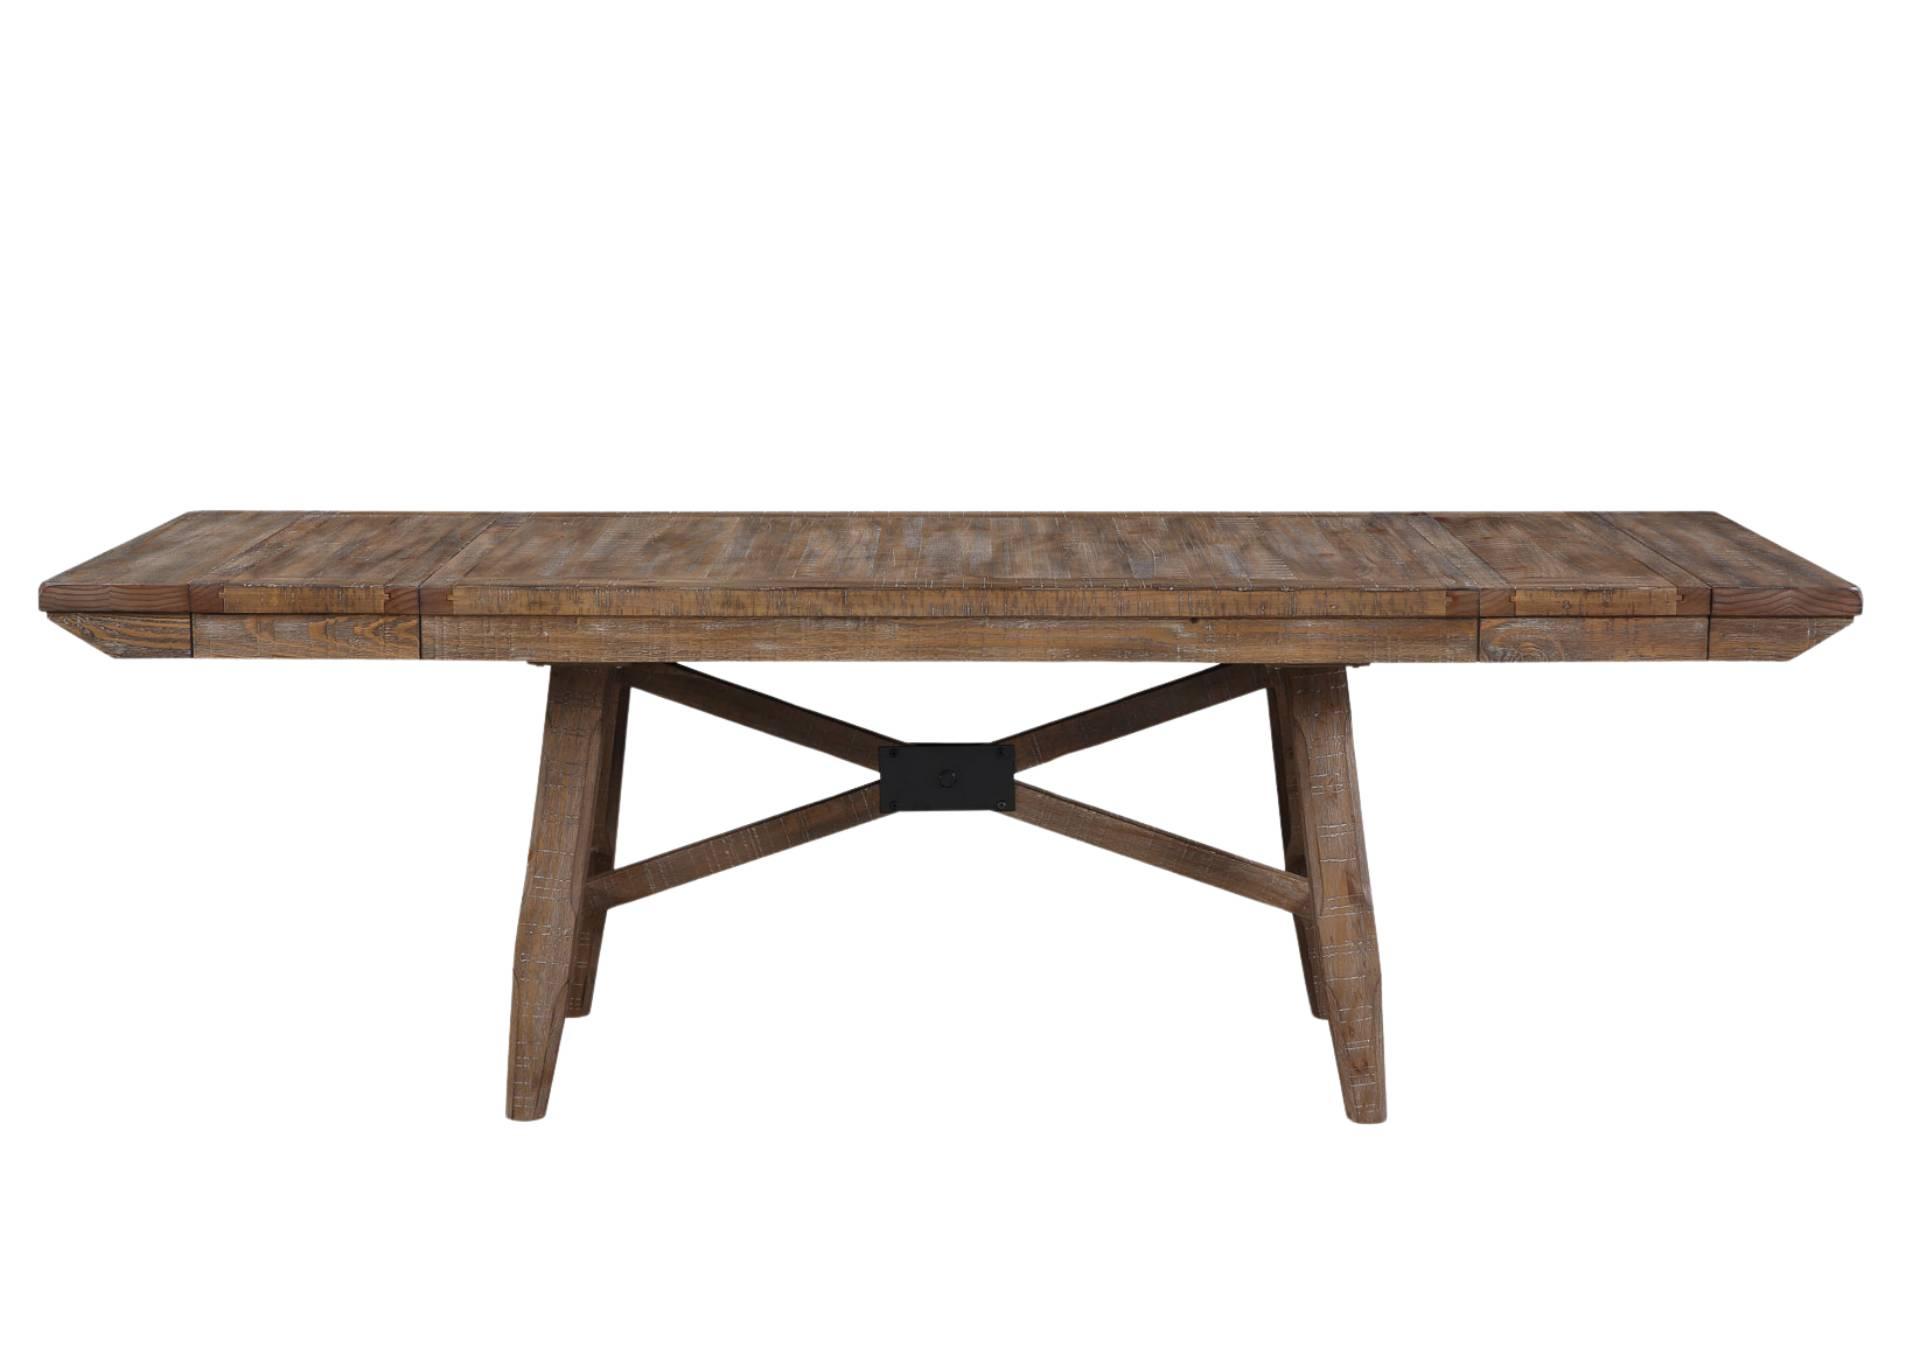 RIVERDALE DINING TABLE 96" W/2 12" LEAVES